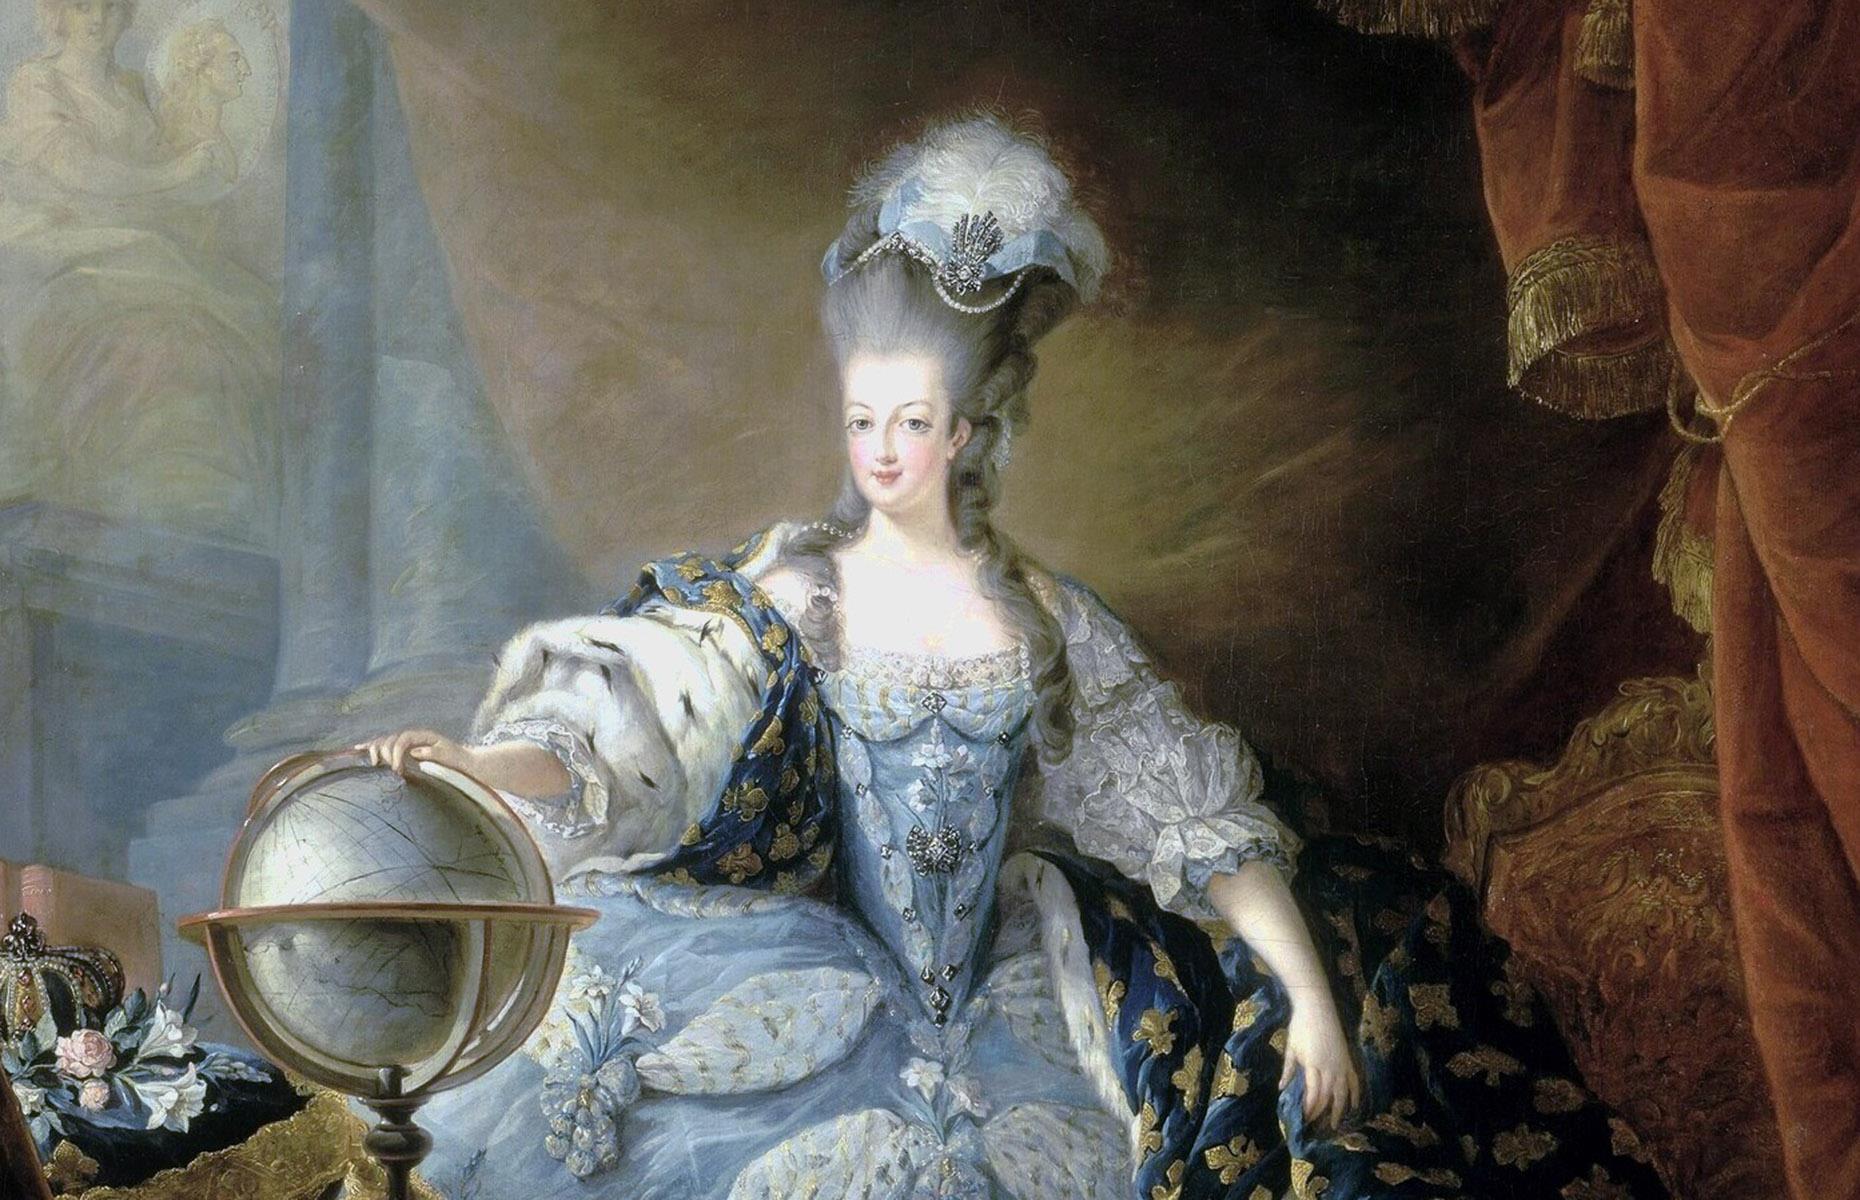 <p>Sparing no expense on her wow-worthy wardrobe, Marie Antoinette became something of a fashion icon during her time on the throne. </p>  <p>The queen is estimated to have splurged on 300 new gowns a year and reportedly never wore the same outfit twice. In 1776, her dress allowance was 150,000 livres, a sum she exceeded by over threefold. For context, that figure roughly translates to $3 million in today's money.</p>  <p>Her frivolous spending on fashion contributed to the French public's belief that their queen was spoiled and vain.</p>